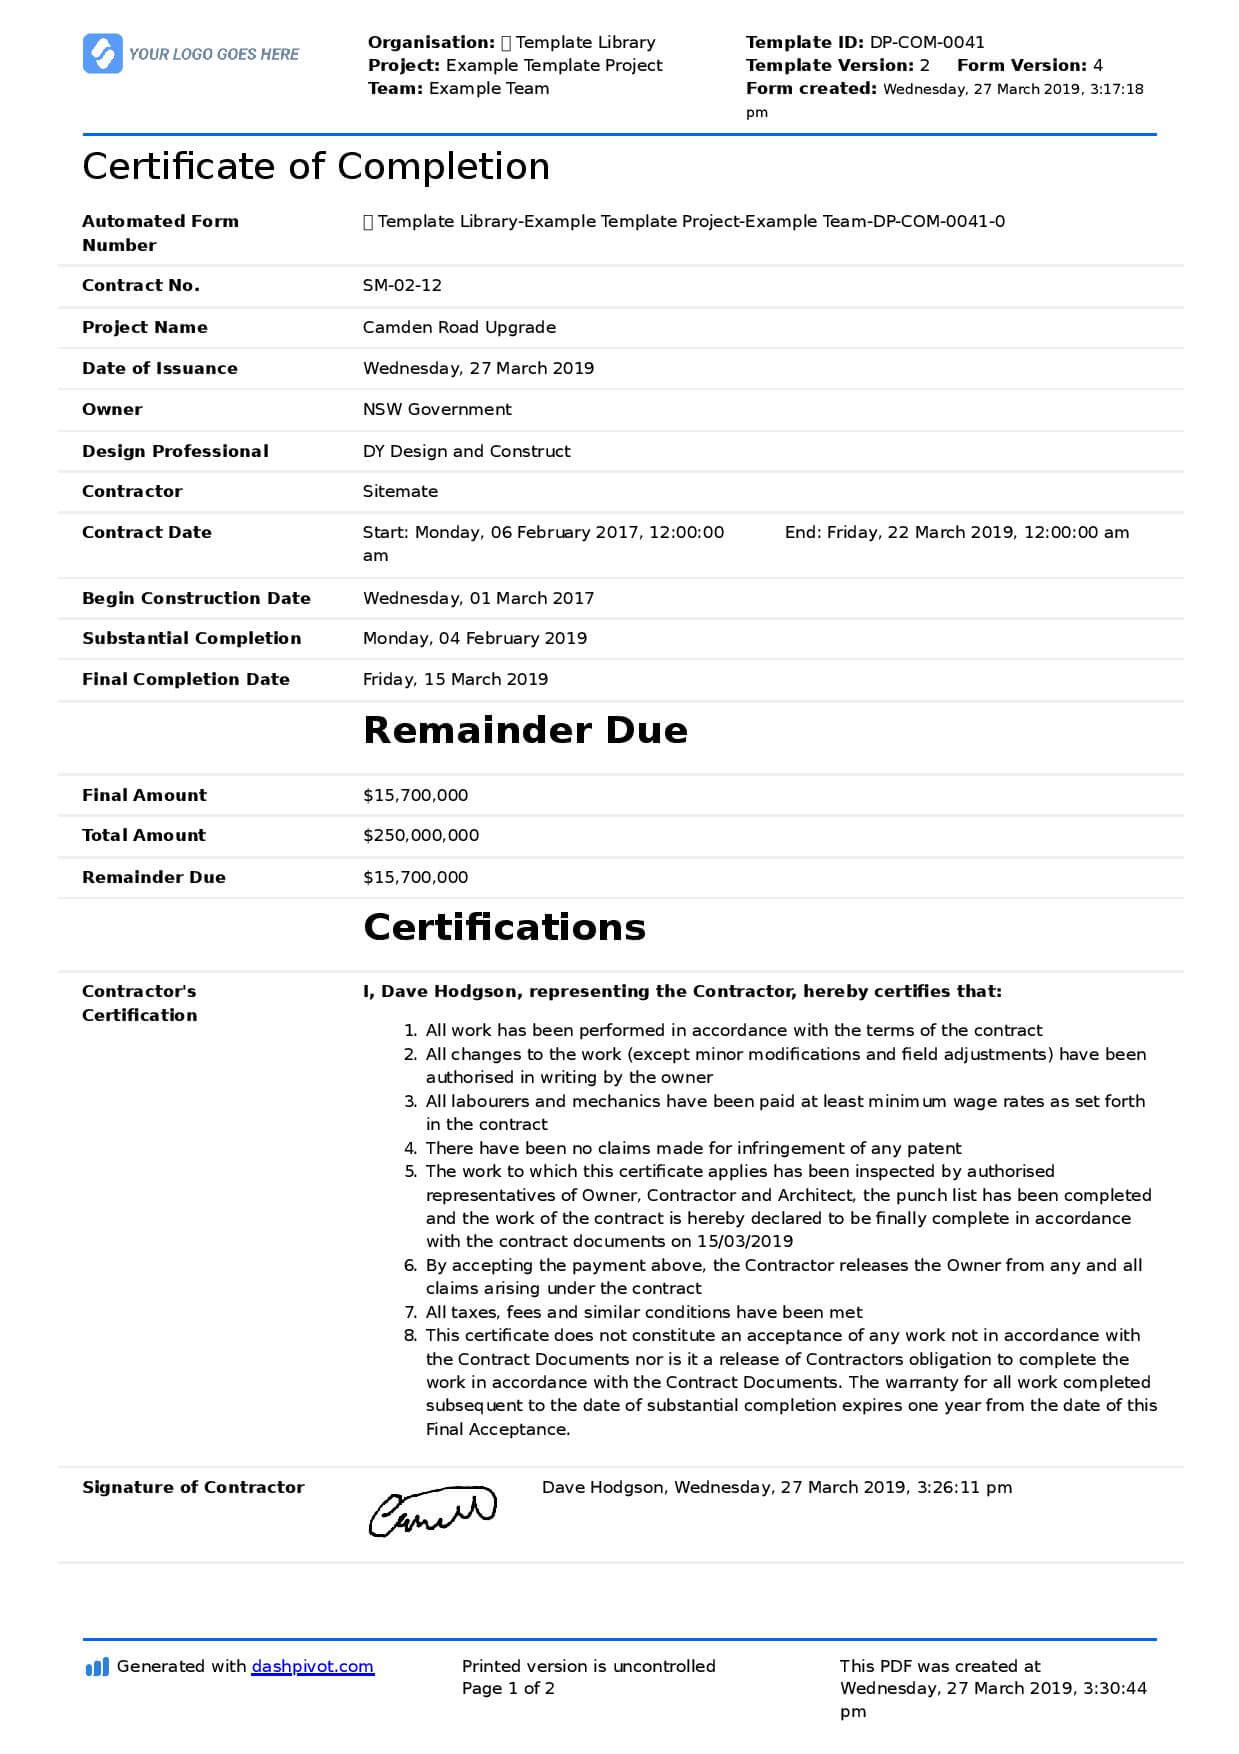 Certificate Of Completion For Construction (Free Template   Inside